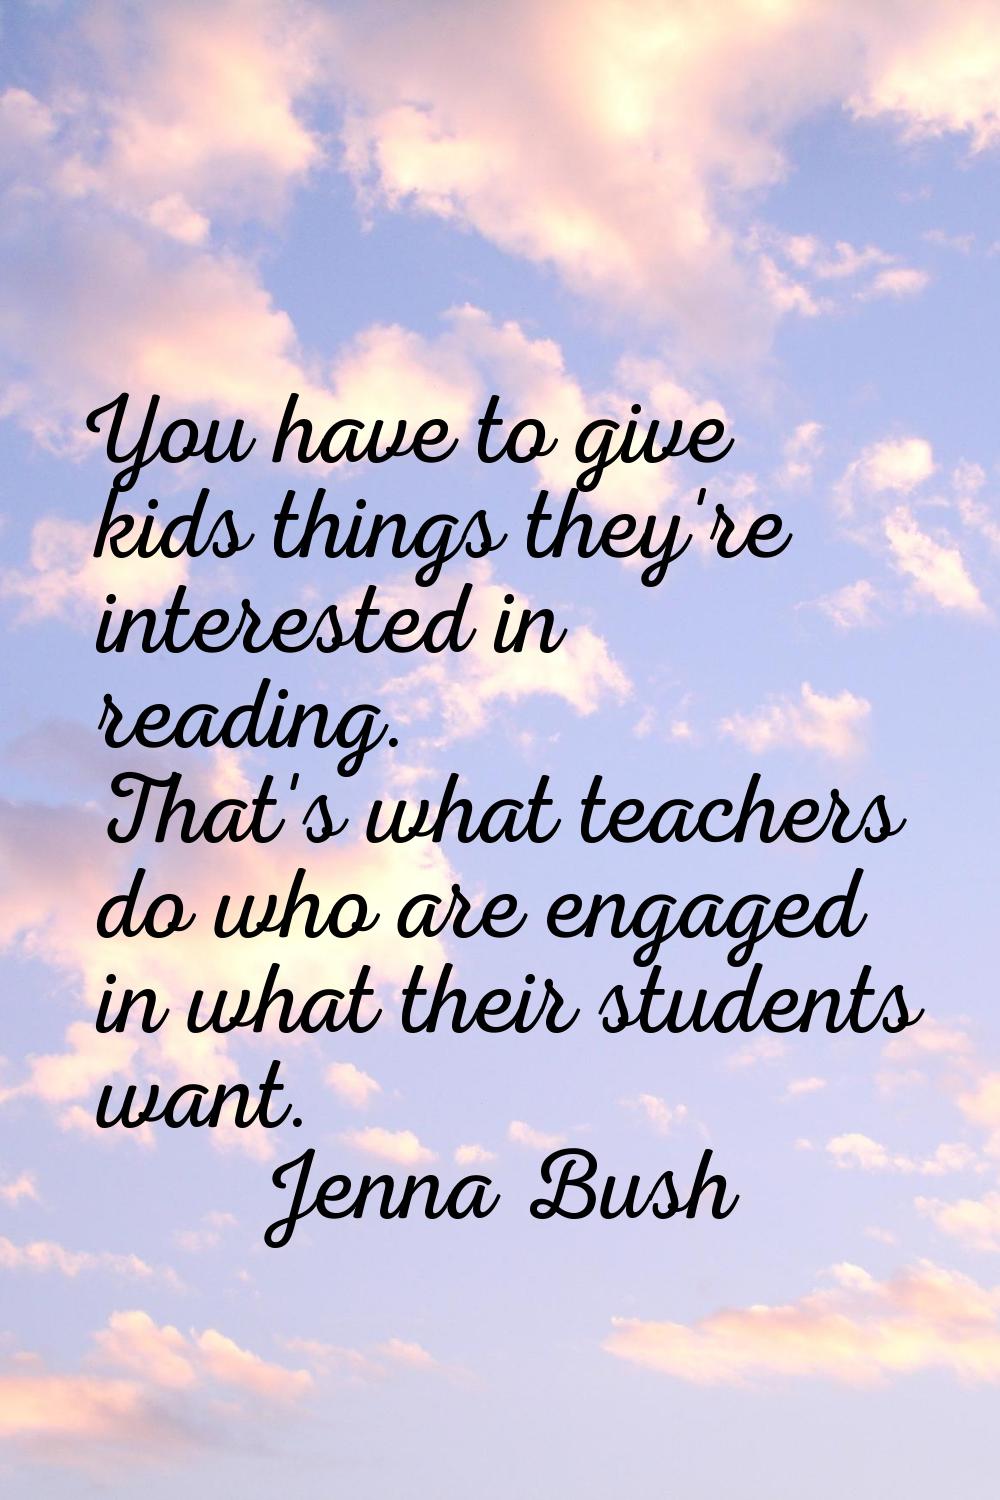 You have to give kids things they're interested in reading. That's what teachers do who are engaged